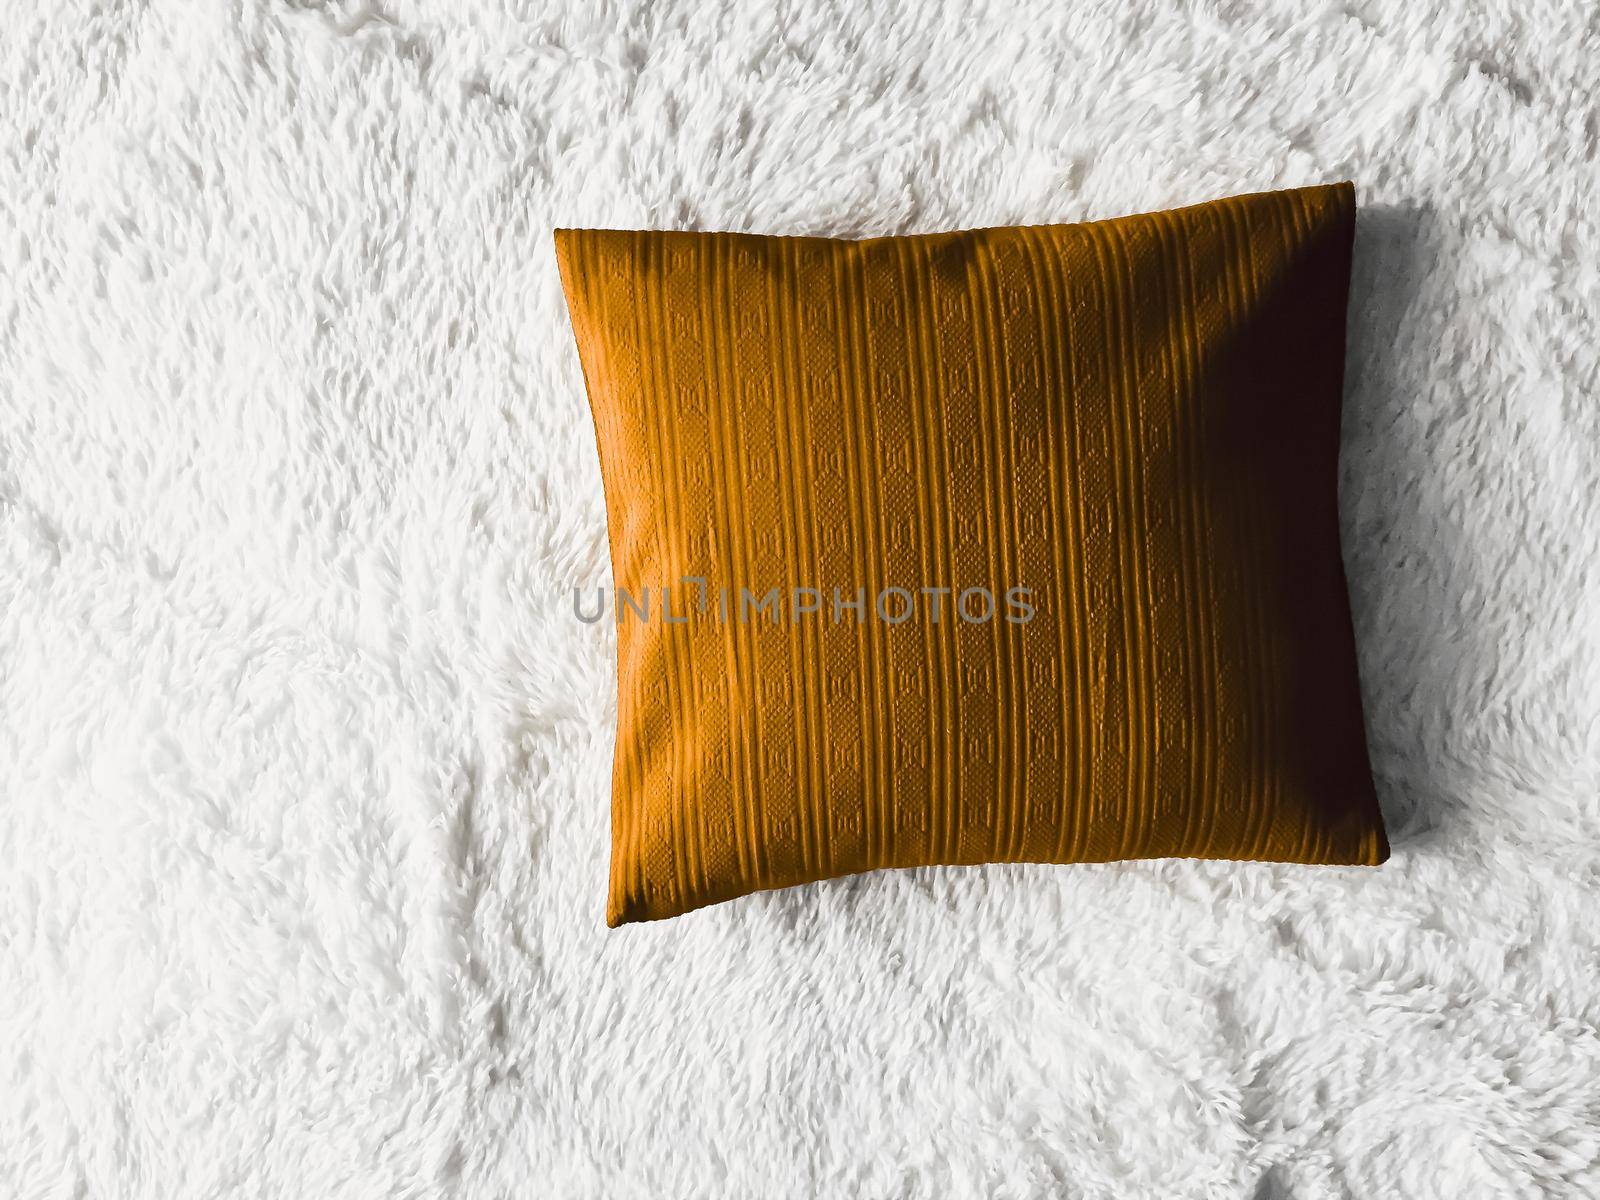 Golden cushion throw pillow on white fluffy plaid blanket as flat lay background, bedroom top view and home decor flatlay